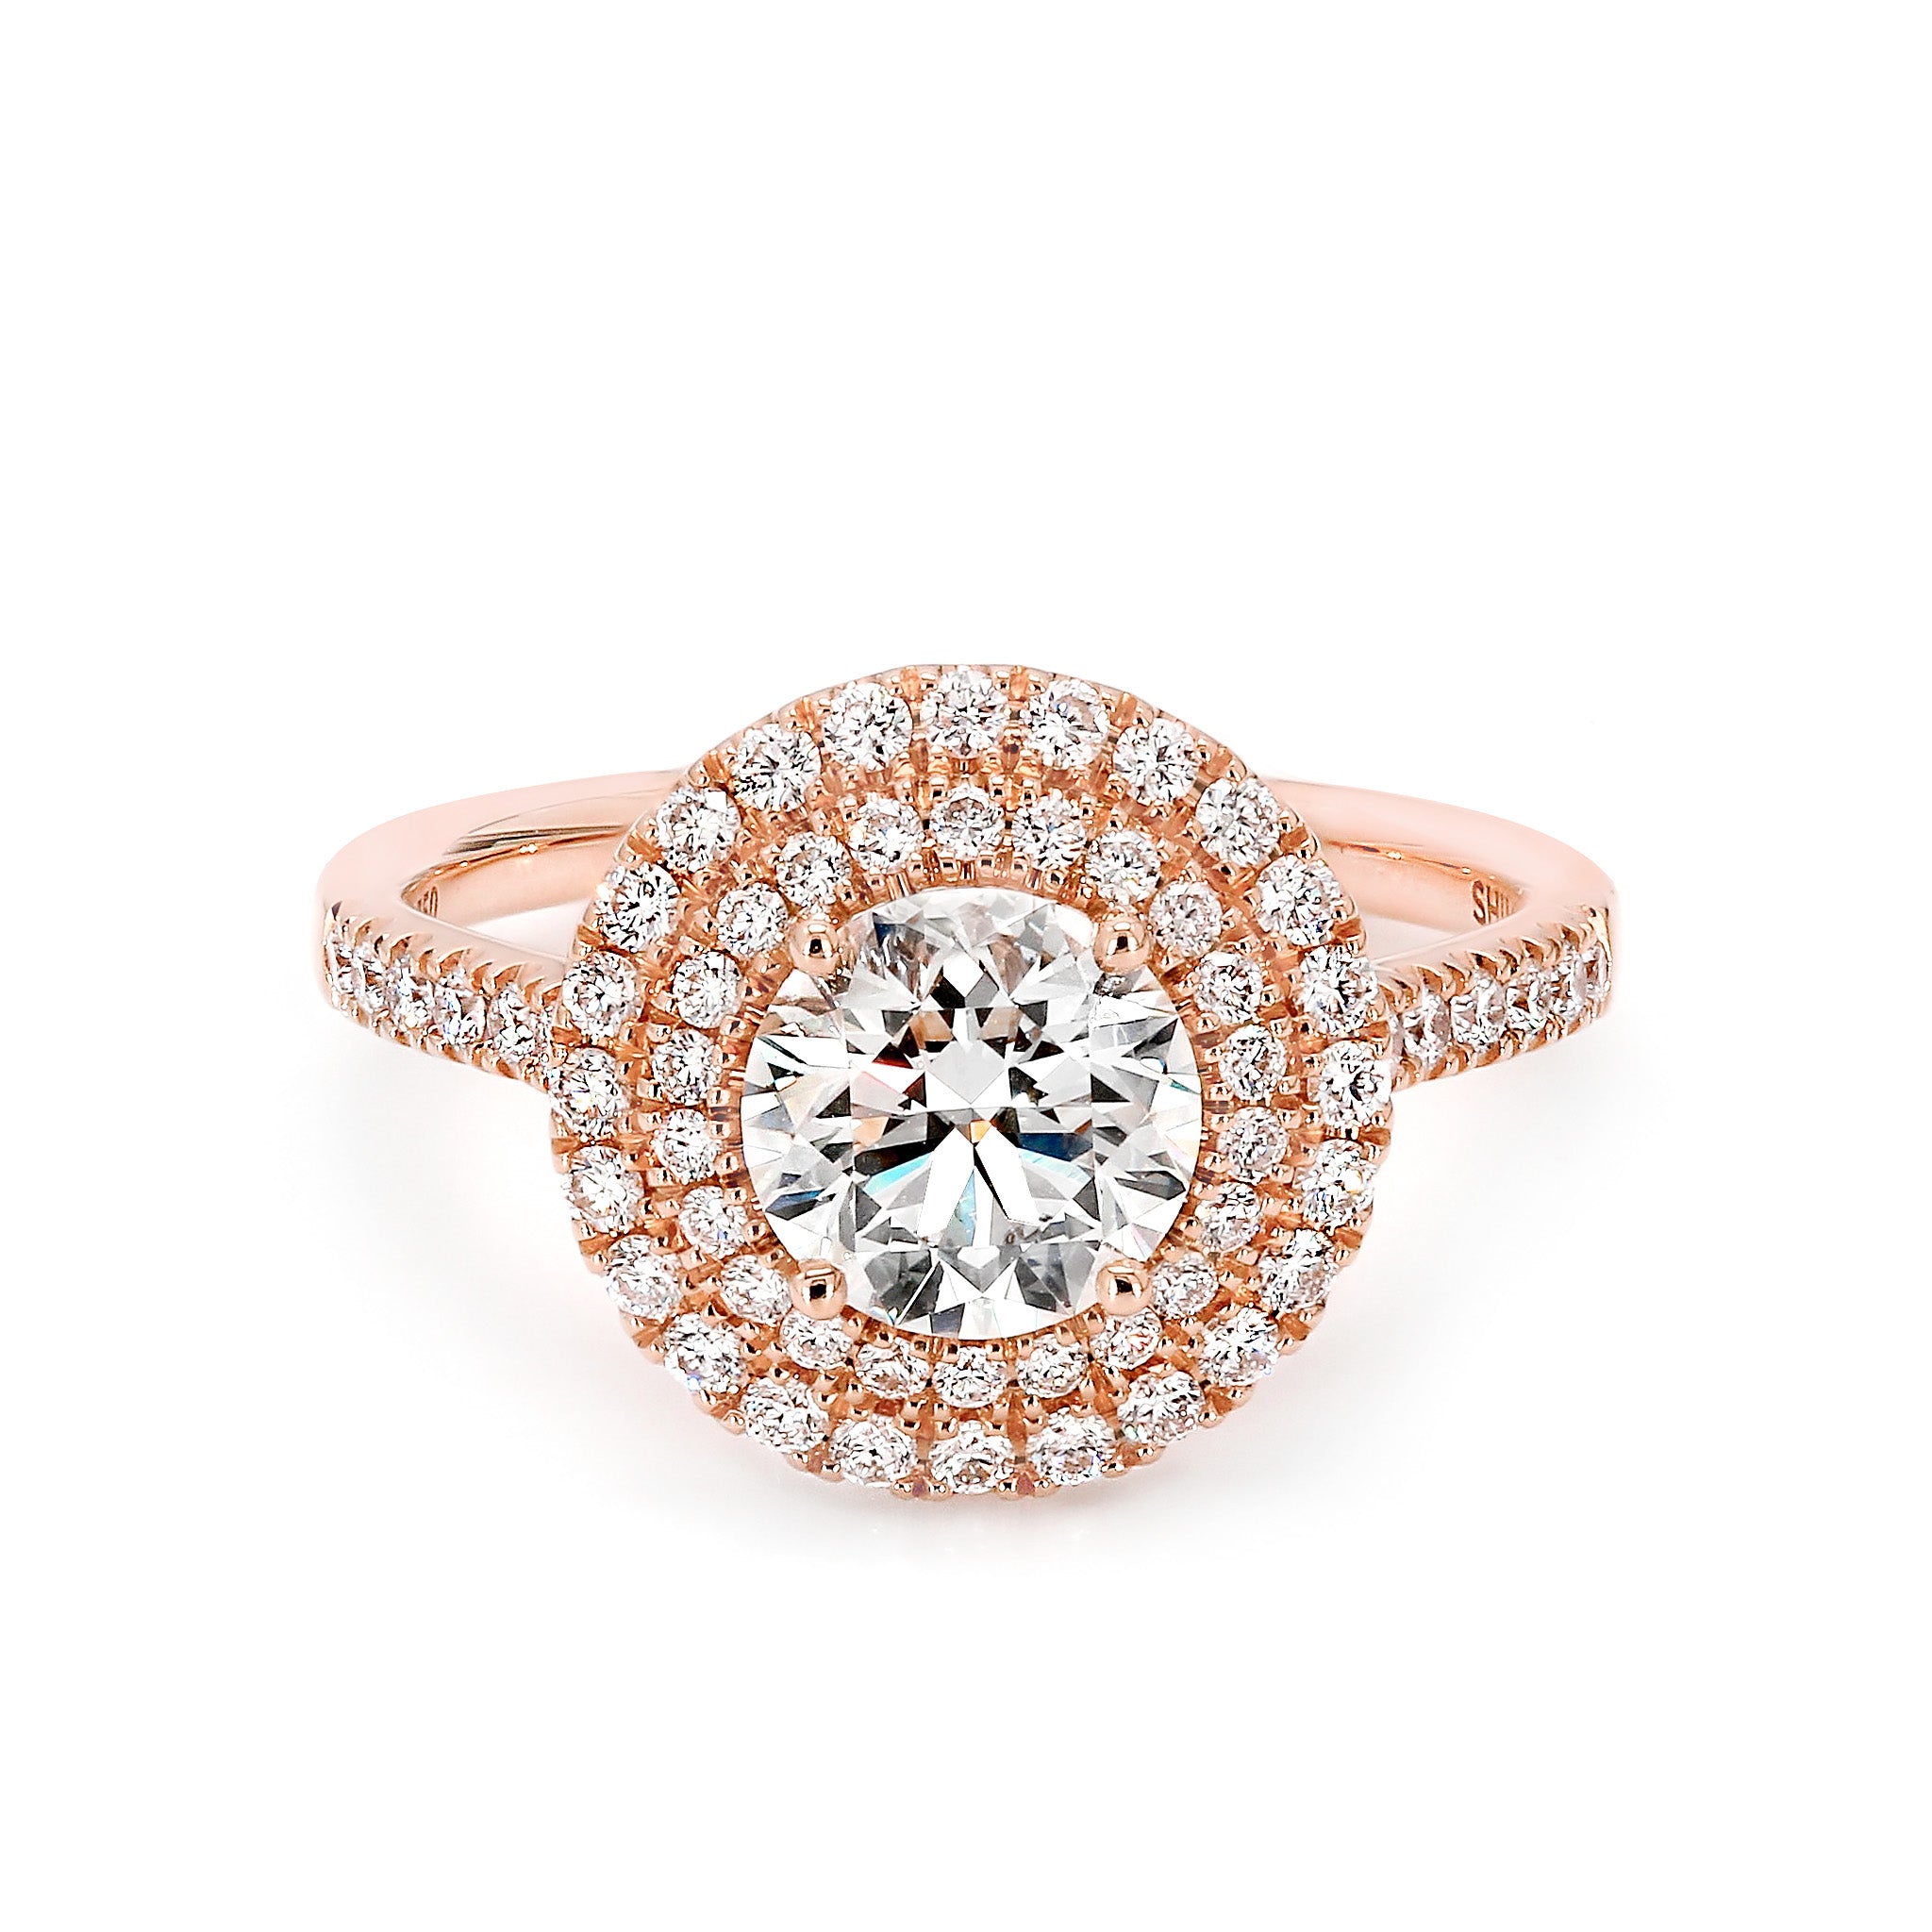 Shimansky - Diamond Double Microset Halo Ring 1.00ct crafted in 18K Rose Gold